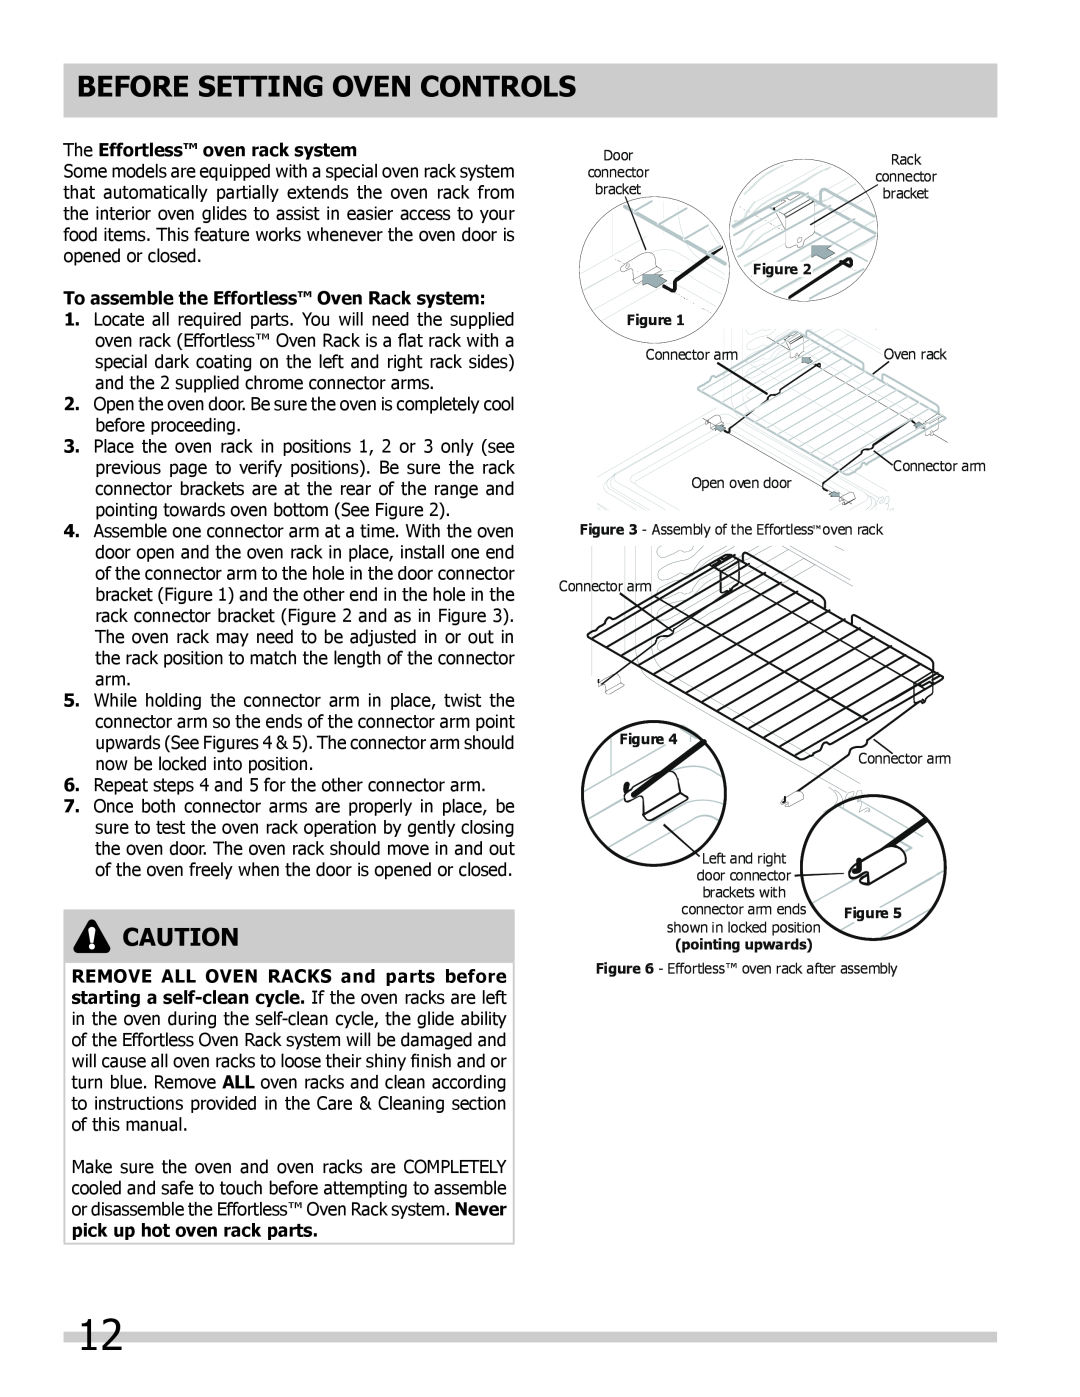 Frigidaire 318205852 manual The Effortless oven rack system, To assemble the Effortless Oven Rack system 